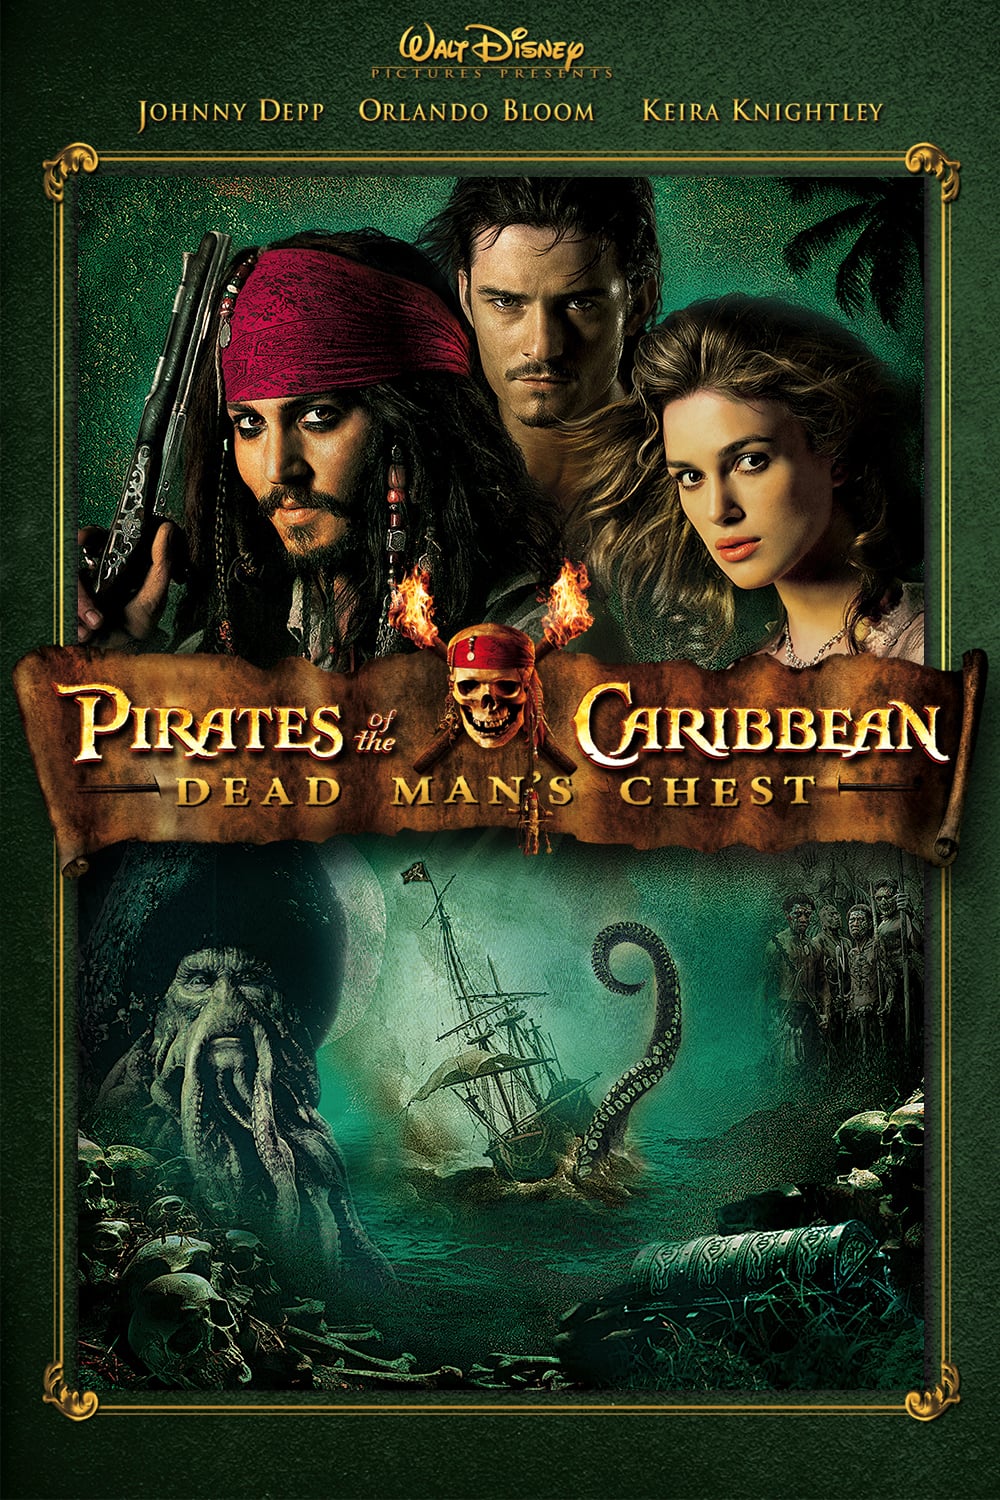 Poster for Pirates of the Caribbean: Dead Man’s Chest